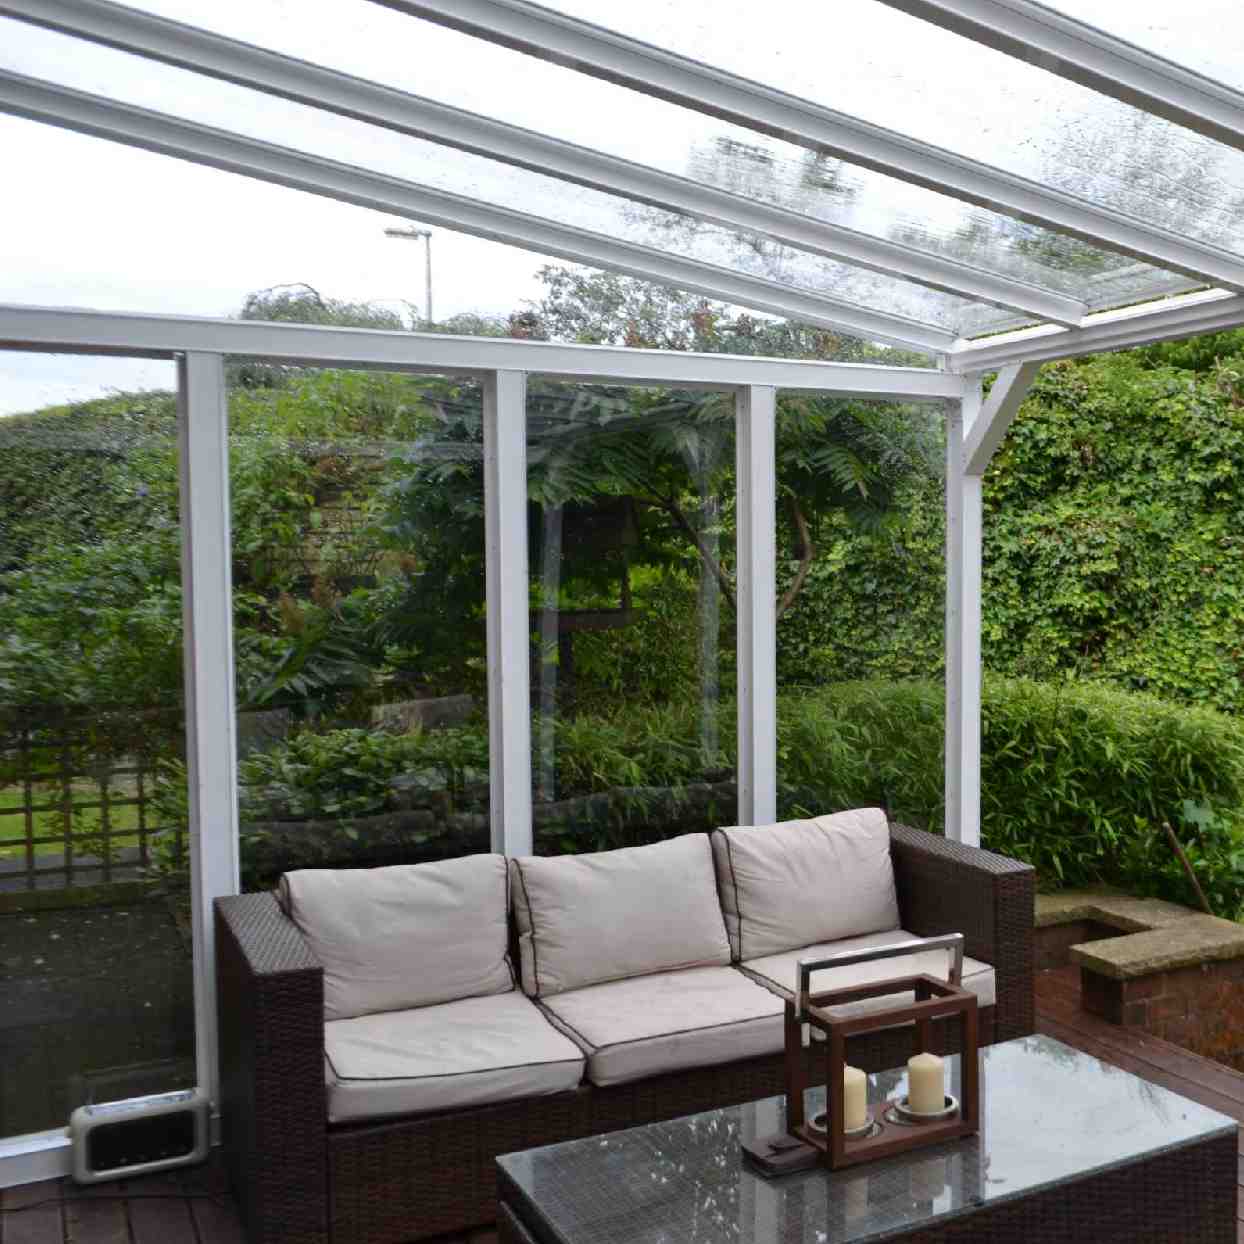 Buy Omega Verandah White with 6mm Glass Clear Plate Polycarbonate Glazing - 9.4m (W) x 4.0m (P), (5) Supporting Posts online today